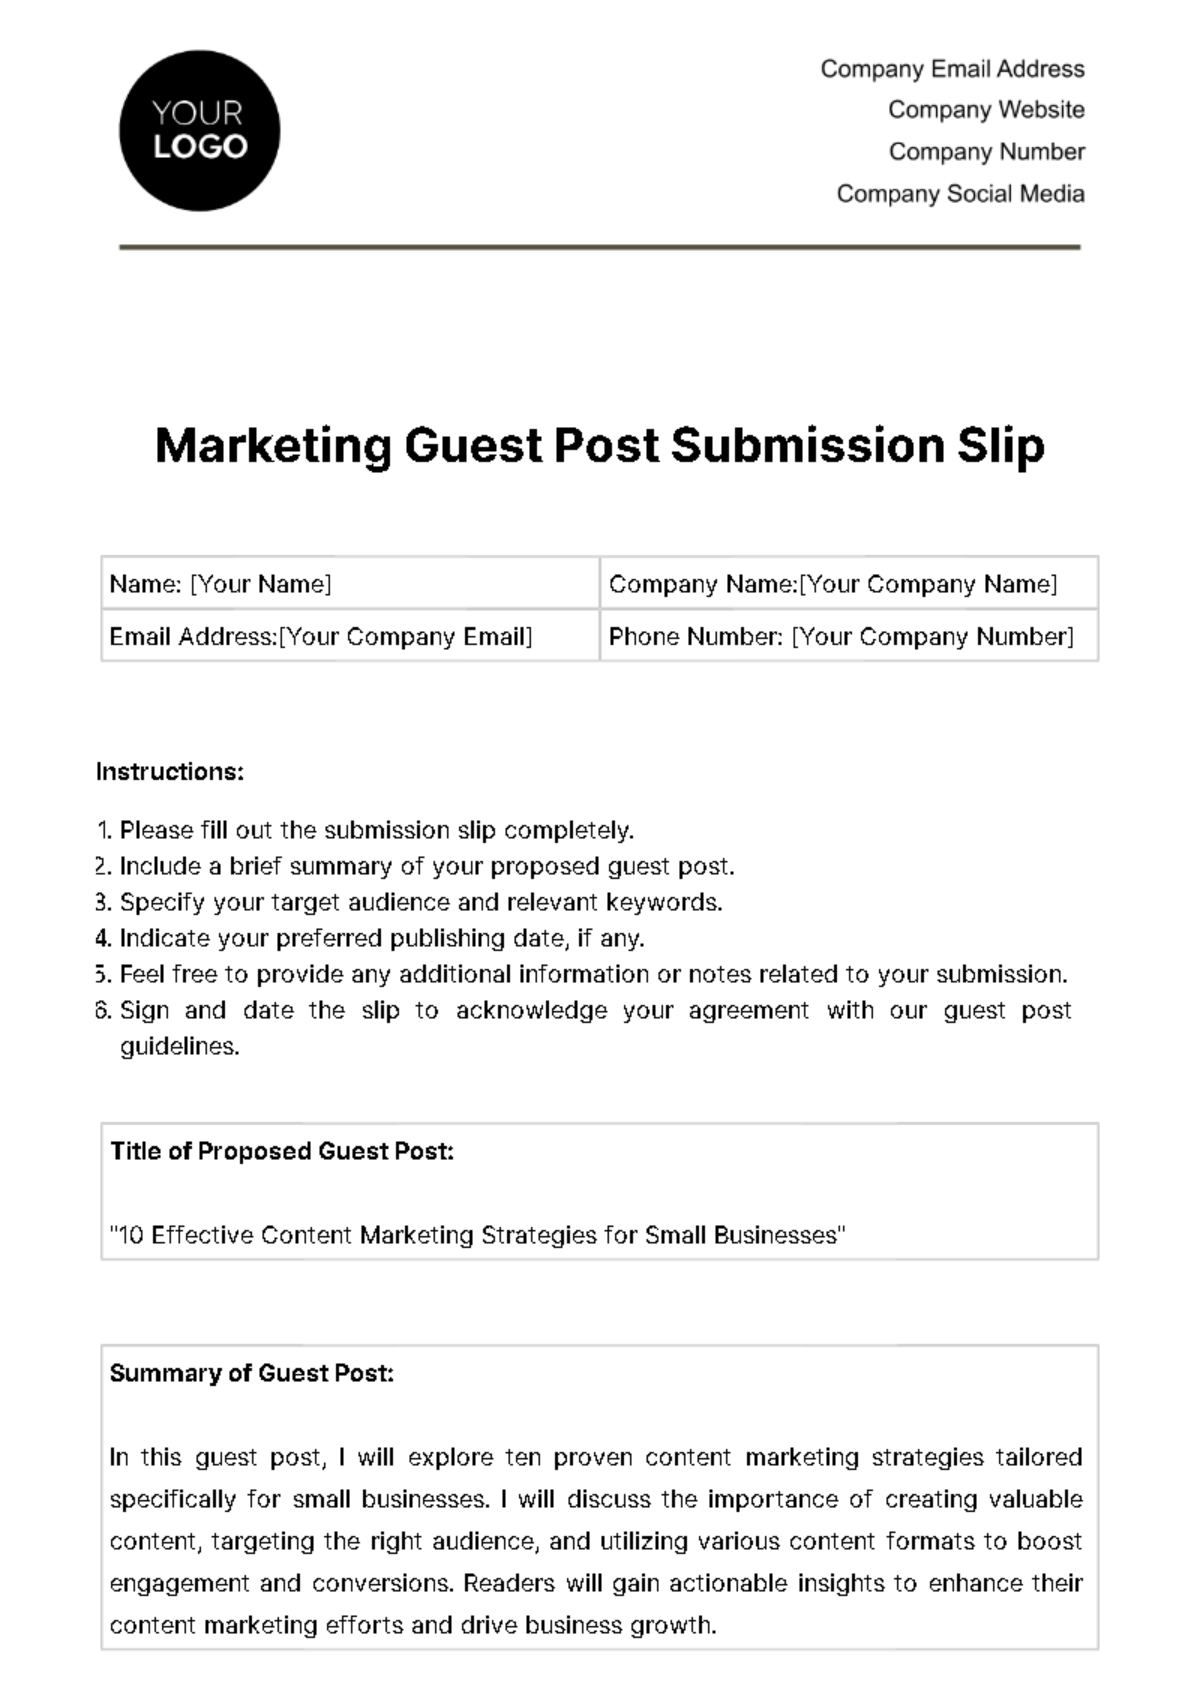 Free Marketing Guest Post Submission Slip Template